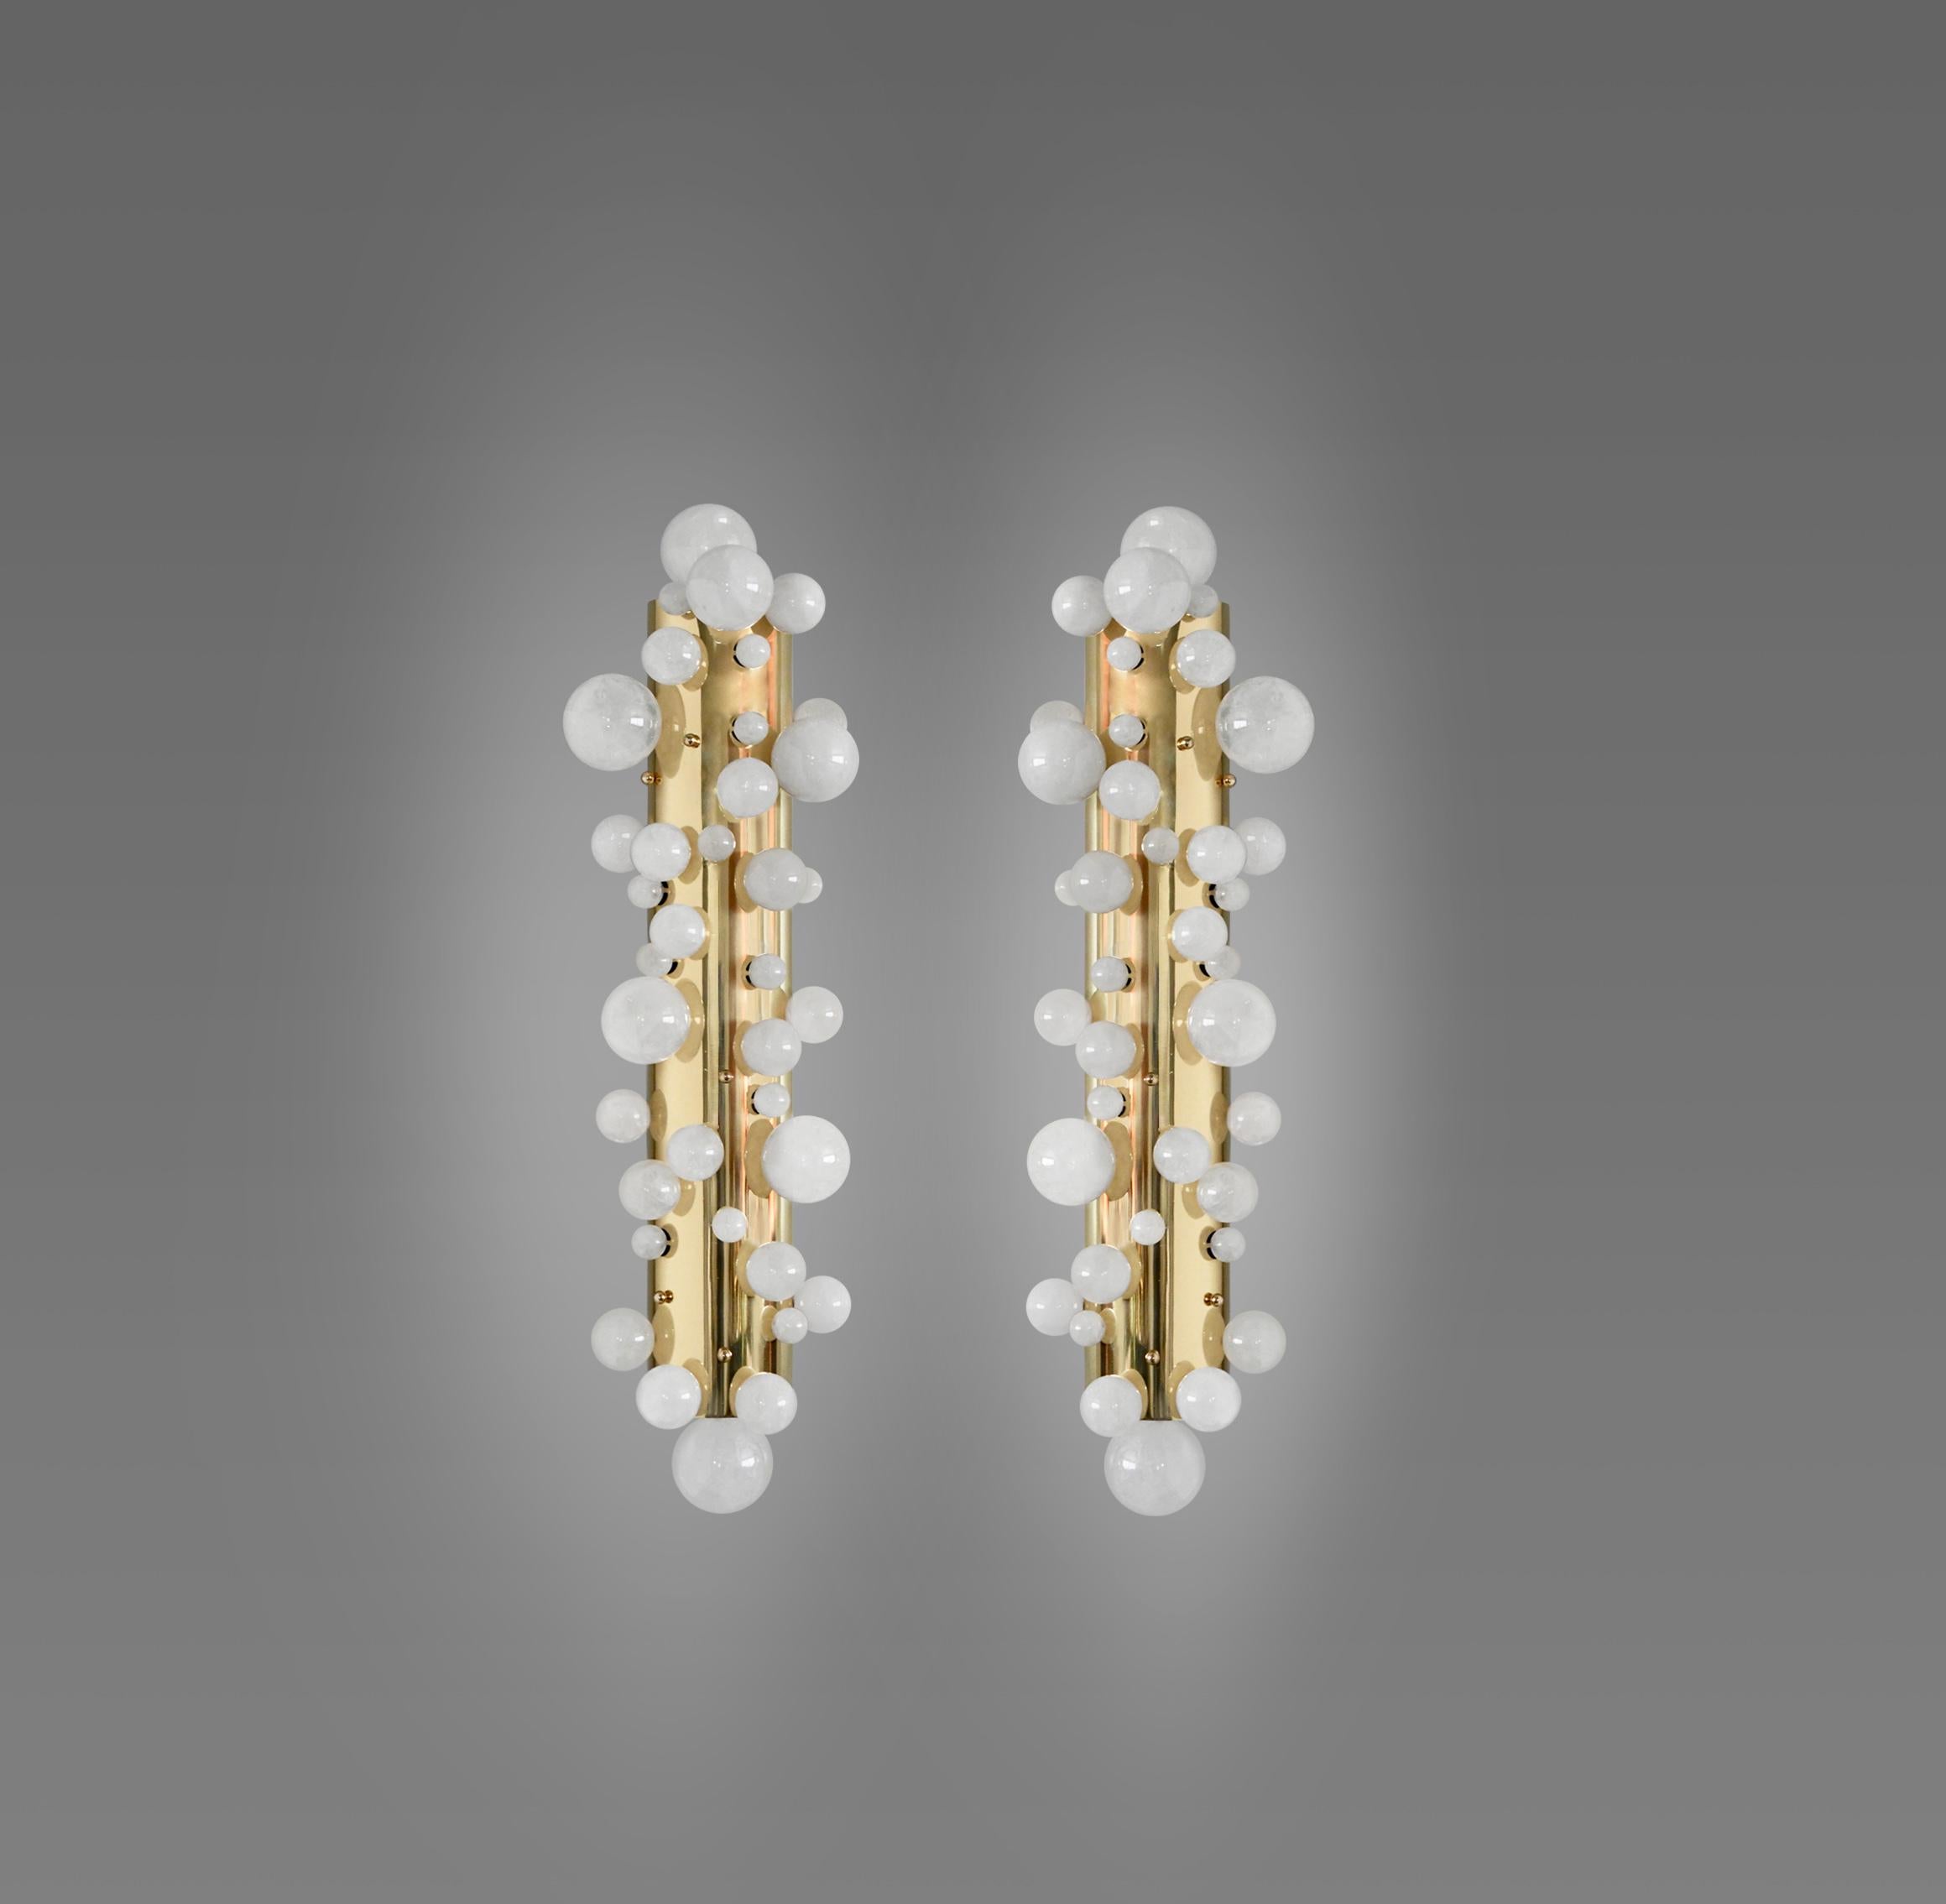 Pair of bubble rock crystal sconces with the polished brass finishes. Created by Phoenix Gallery, NYC.
Each sconce installed four sockets. Use four 60w LED warm light bulbs. Total 240w max. Light bulbs included.
Custom size upon request.
Recommend